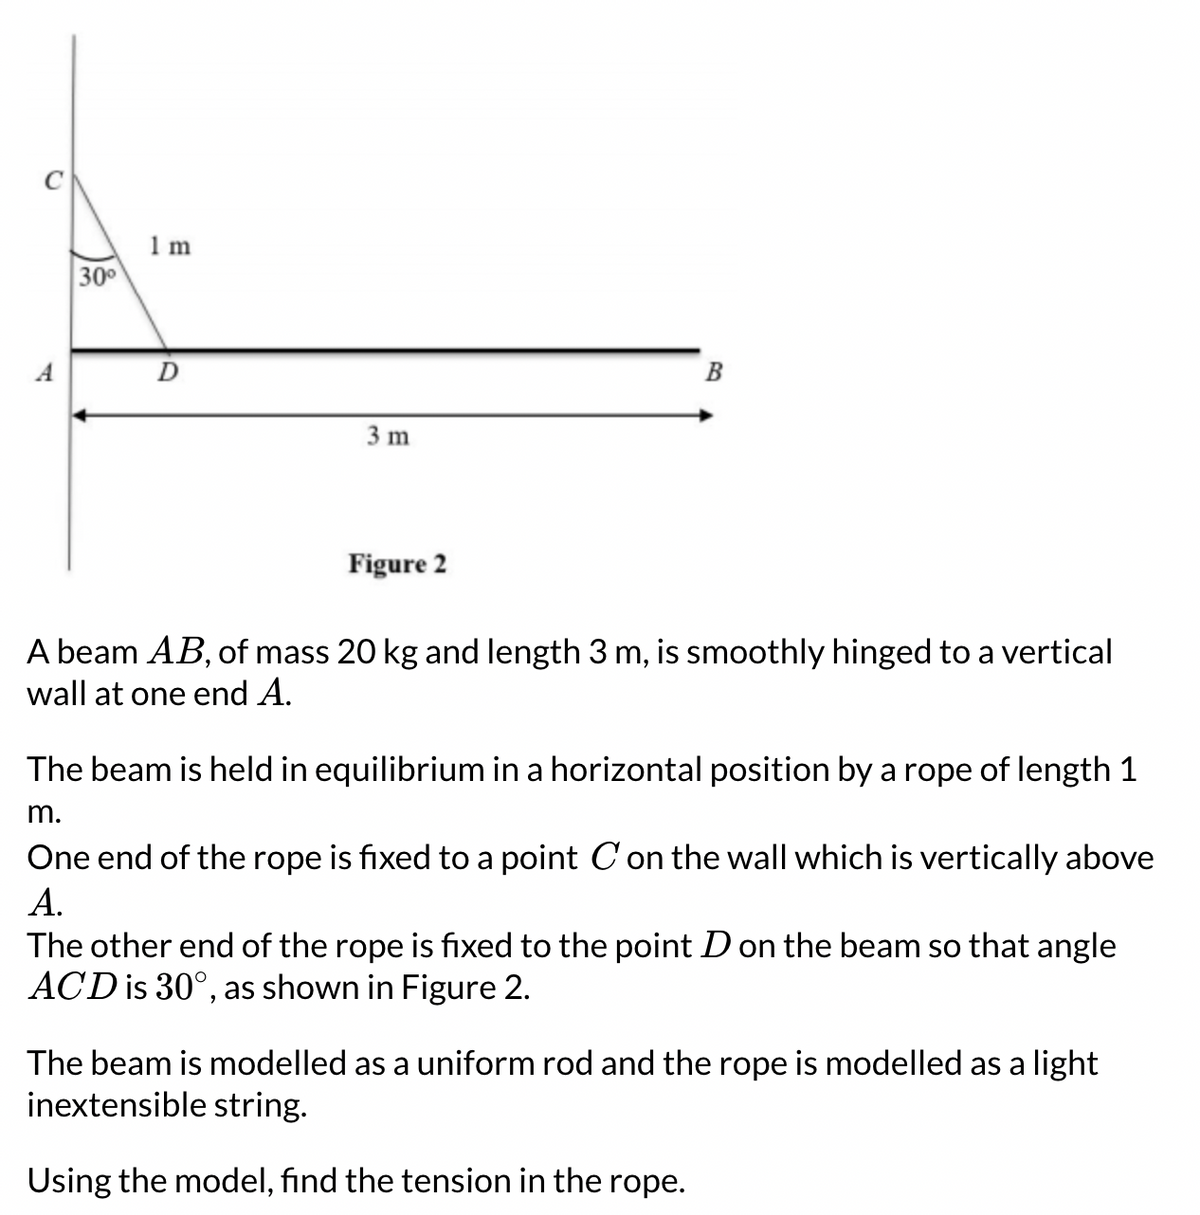 30⁰
1m
D
3 m
Figure 2
B
A beam AB, of mass 20 kg and length 3 m, is smoothly hinged to a vertical
wall at one end A.
The beam is held in equilibrium in a horizontal position by a rope of length 1
m.
One end of the rope is fixed to a point Con the wall which is vertically above
A.
The other end of the rope is fixed to the point D on the beam so that angle
ACD is 30°, as shown in Figure 2.
The beam is modelled as a uniform rod and the rope is modelled as a light
inextensible string.
Using the model, find the tension in the rope.